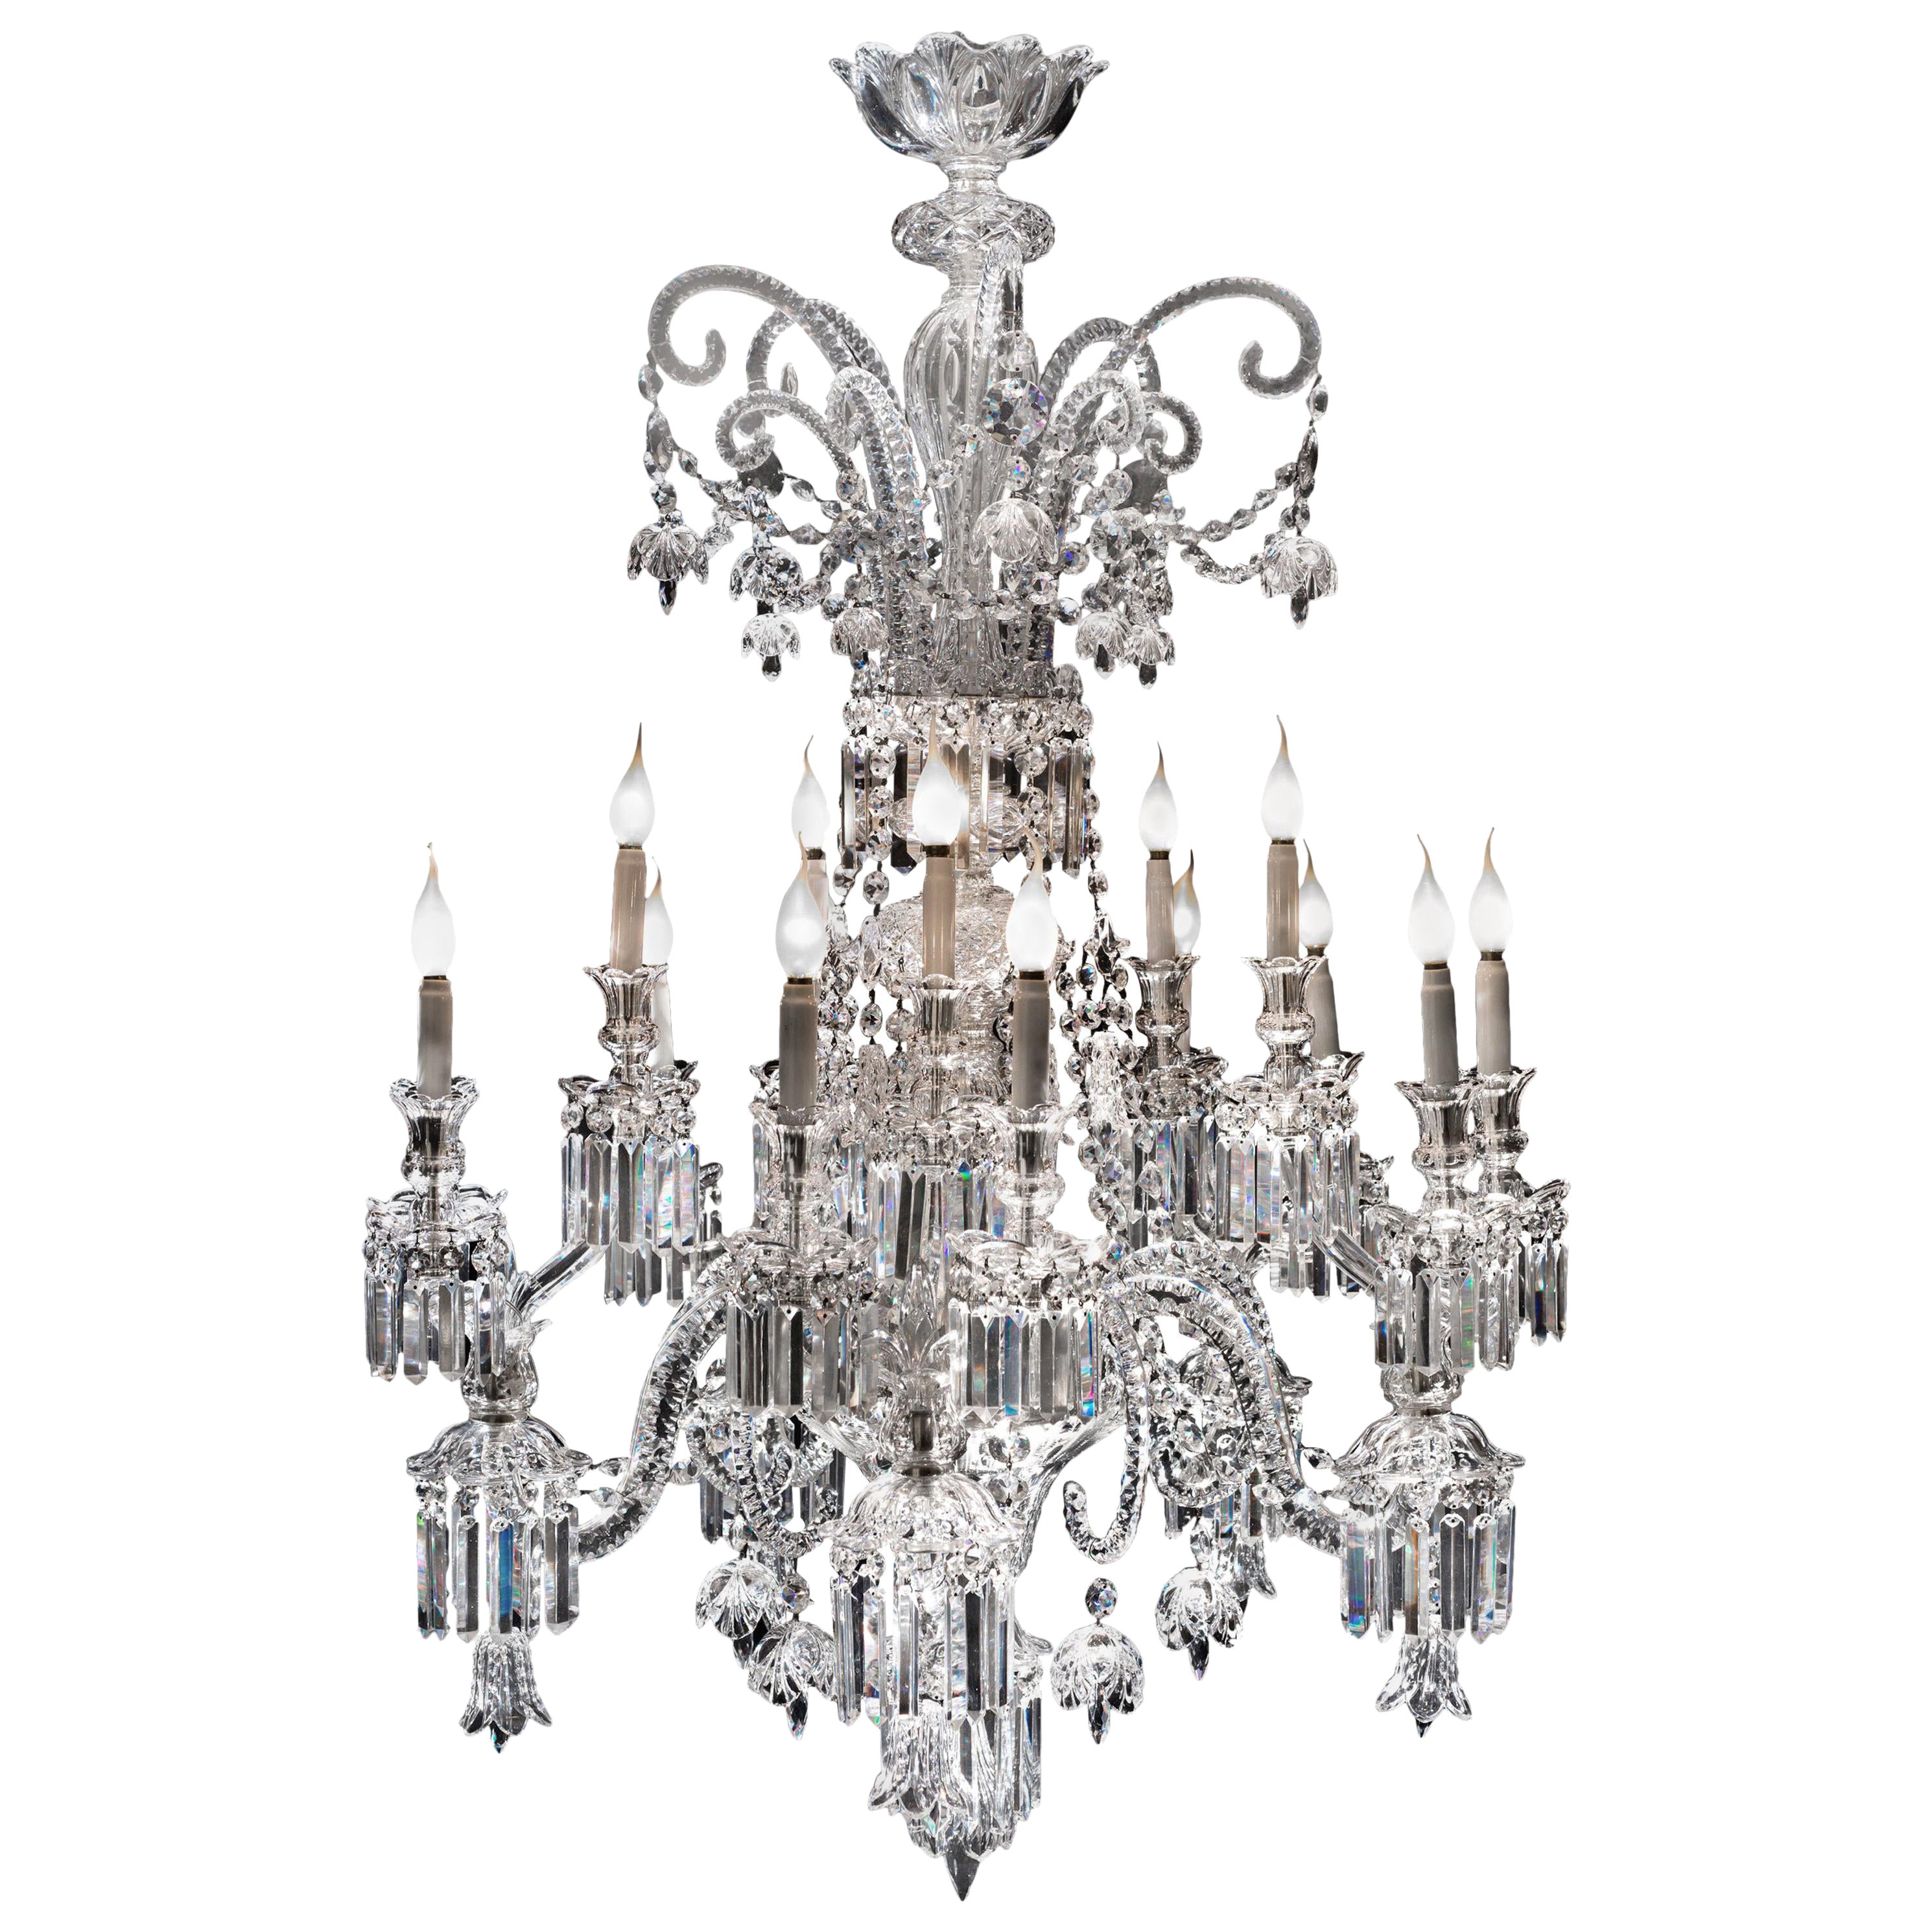 Baccarat Crystal Exceptional Chandelier, France, Early 19th Century For Sale